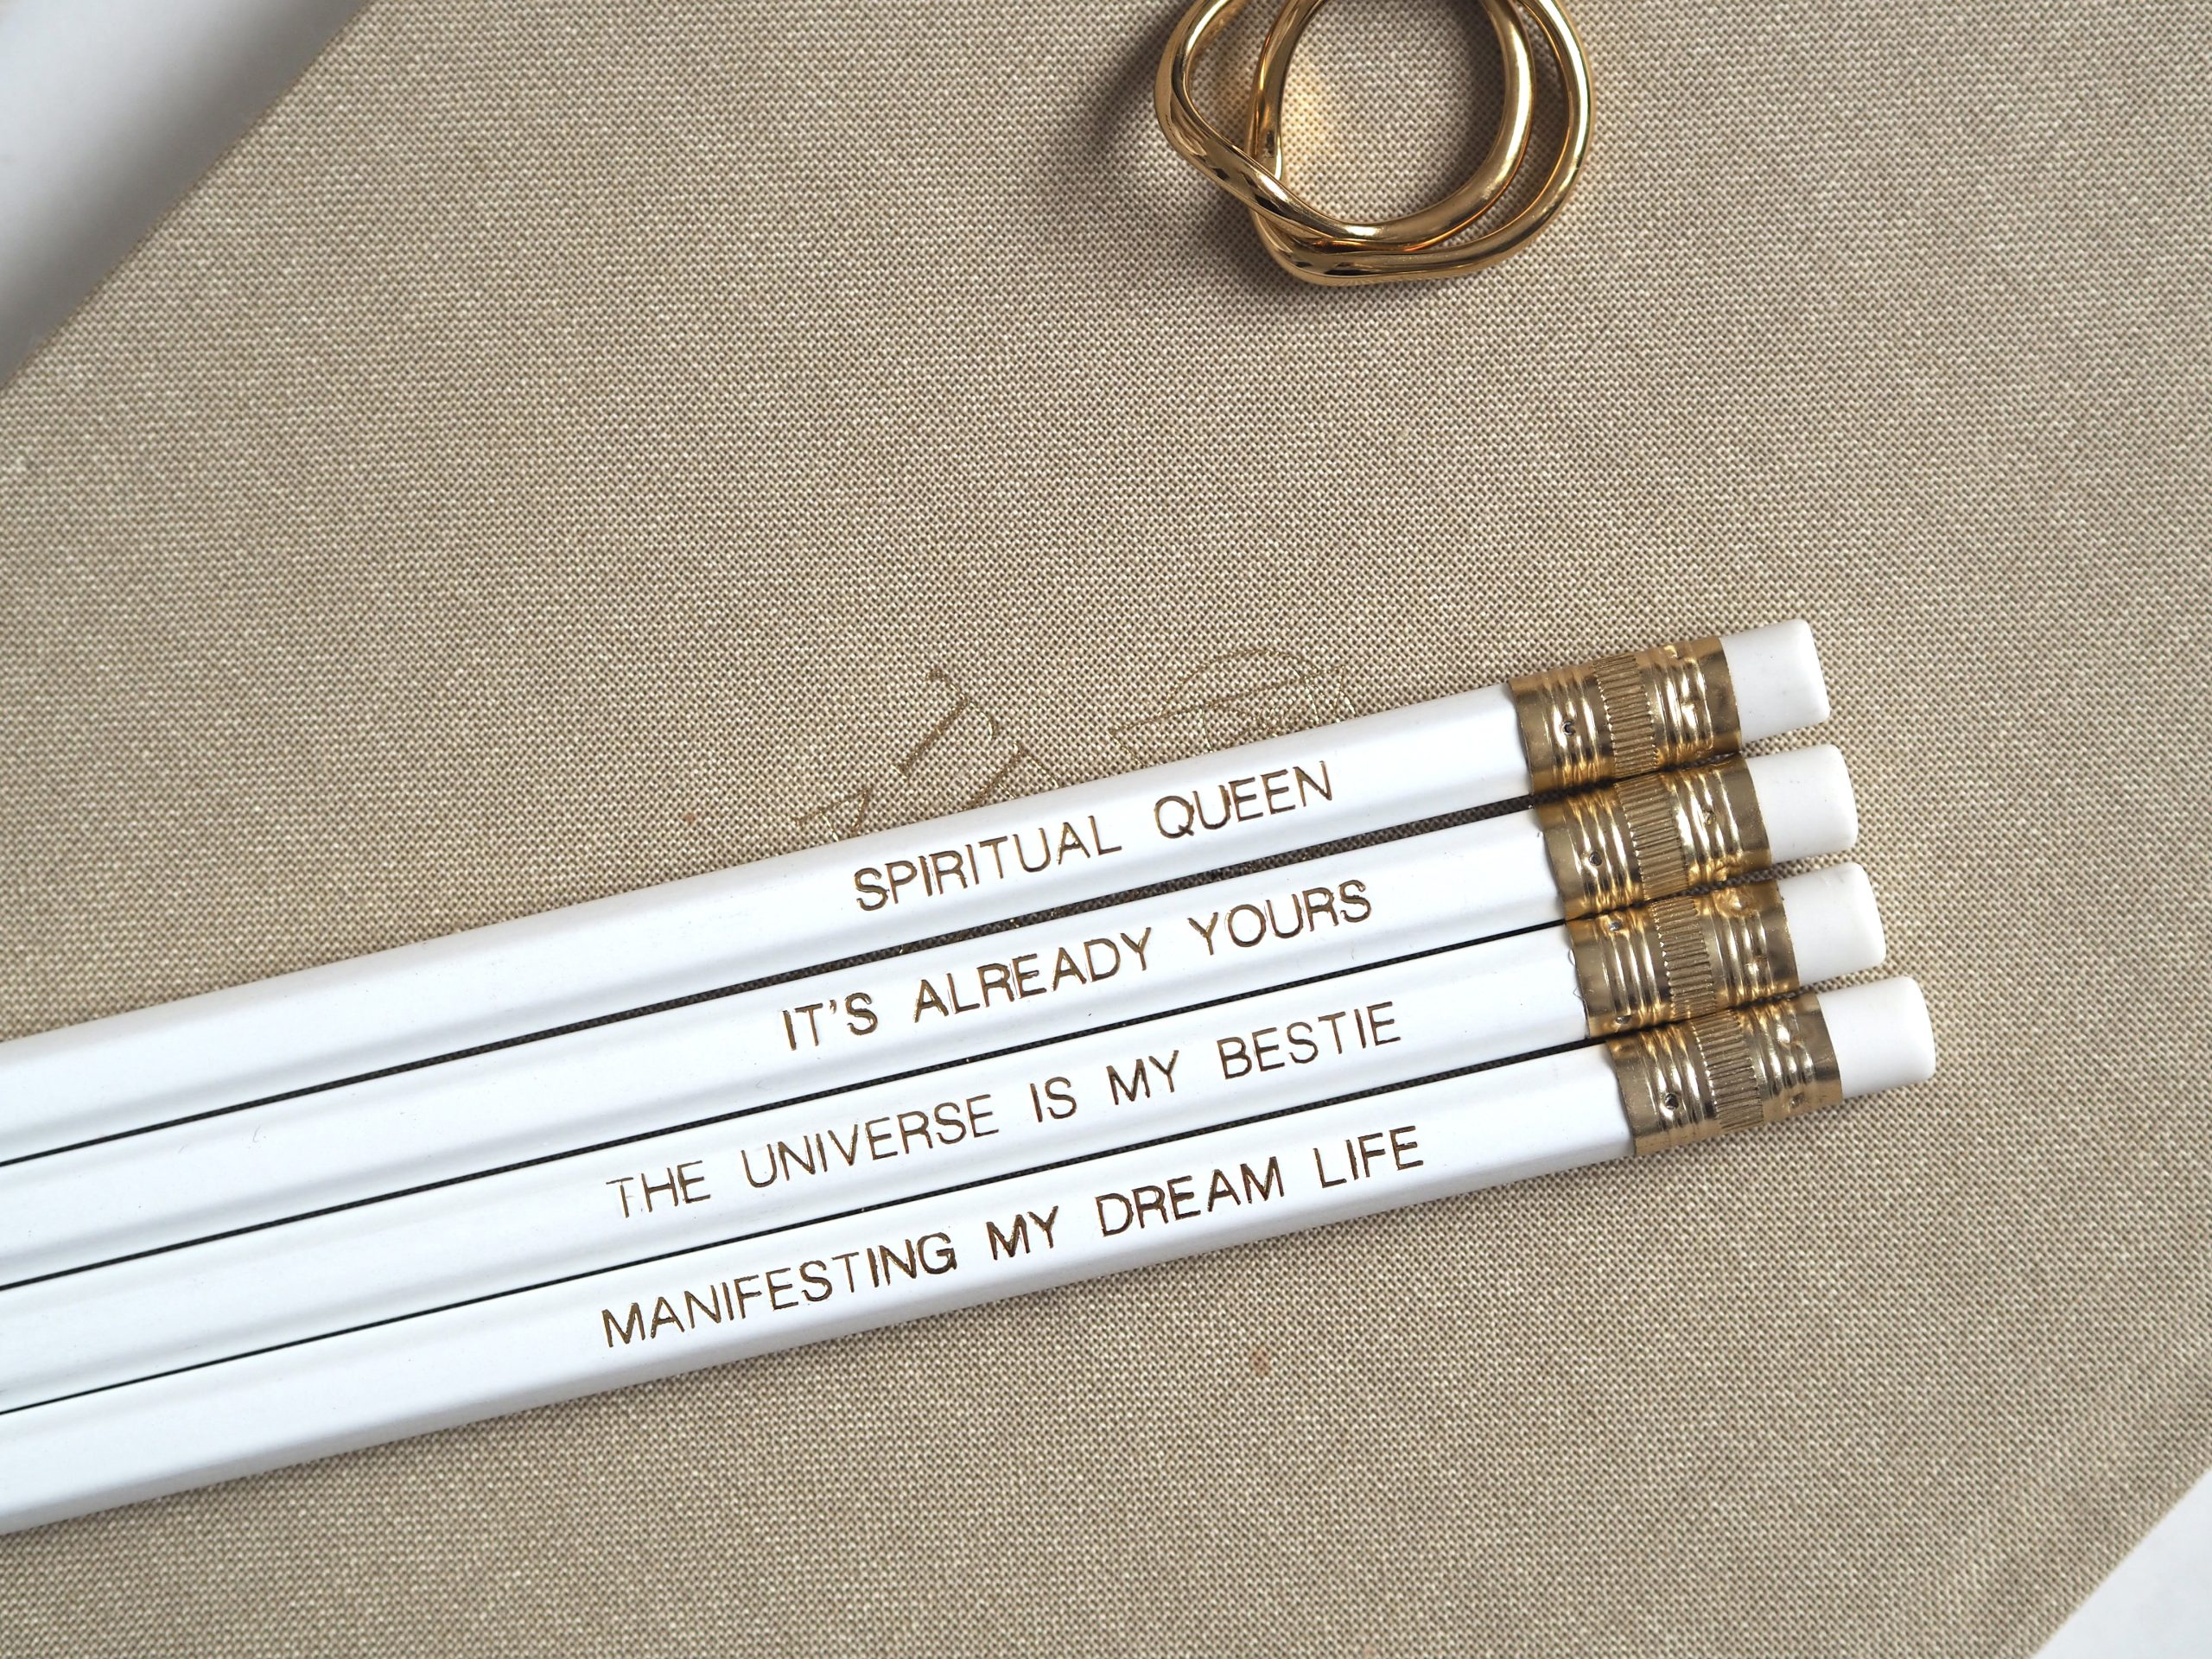 LAW OF ATTRACTION GOLD FOIL PENCILS | EMMA MUMFORD